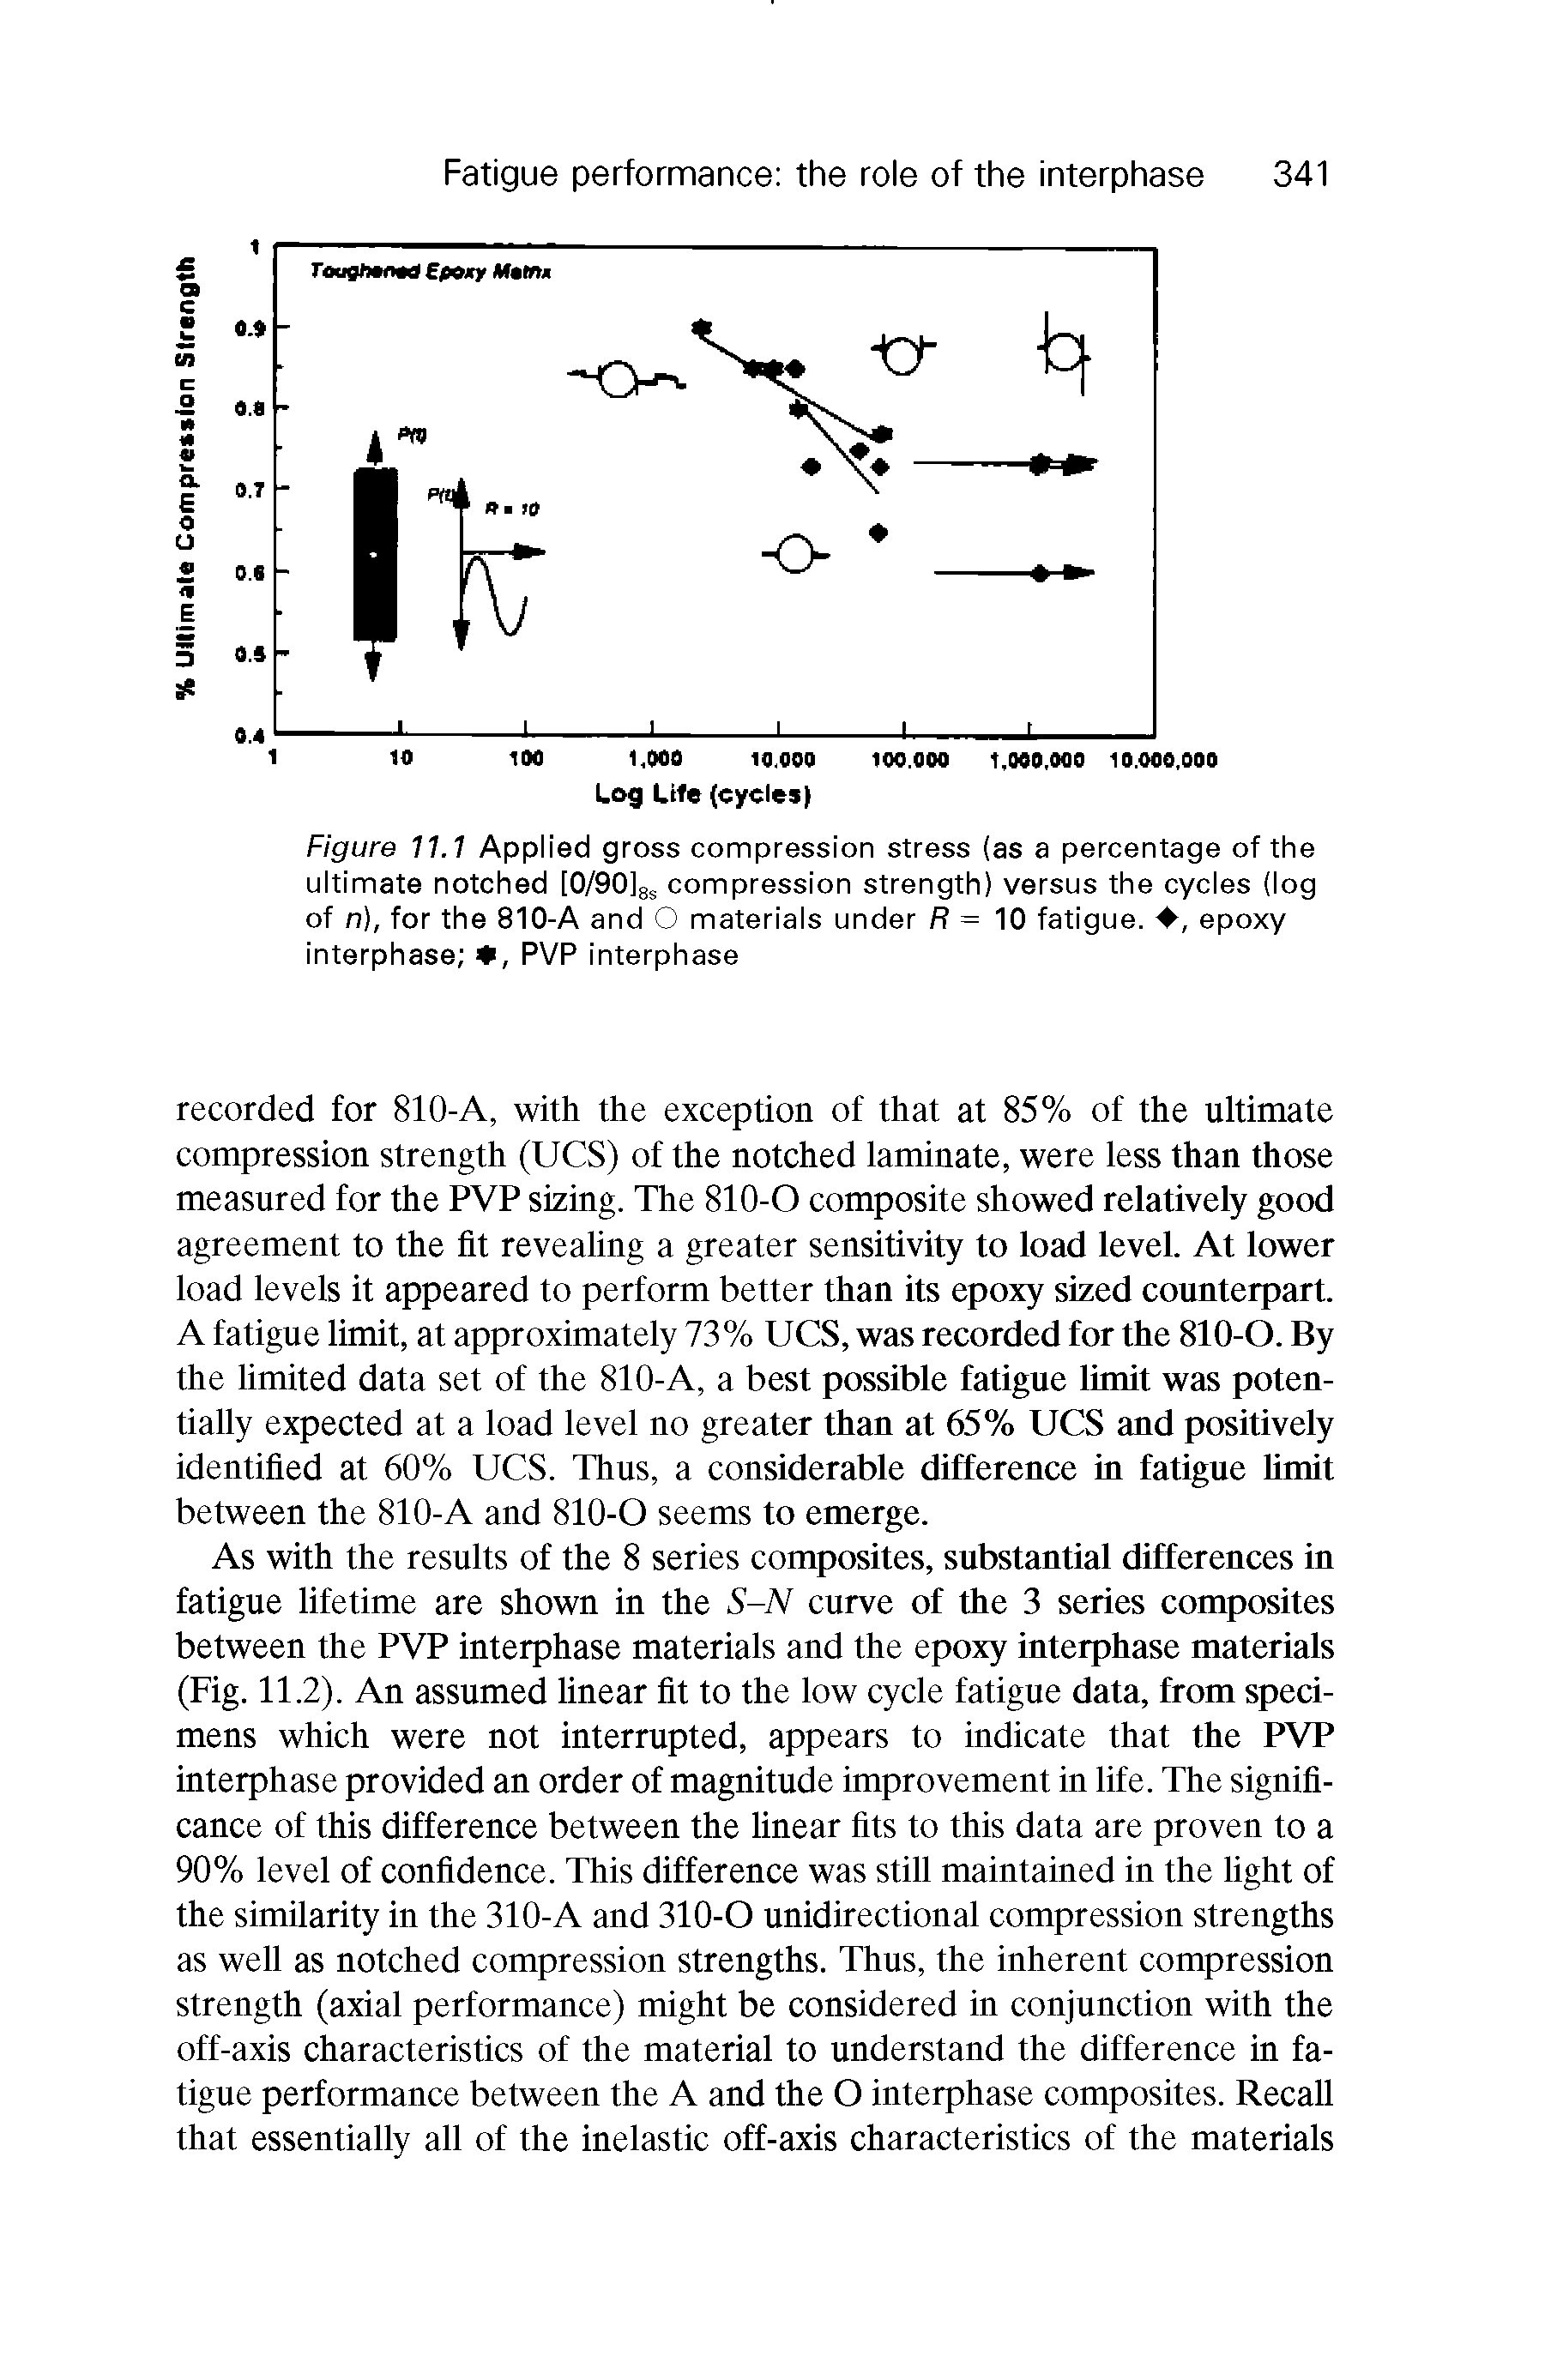 Figure 11.1 Applied gross compression stress (as a percentage of the ultimate notched [O/eoigs compression strength) versus the cycles (log of n), for the 810-A and O materials under / = 10 fatigue. , epoxy interphase , PVP interphase...